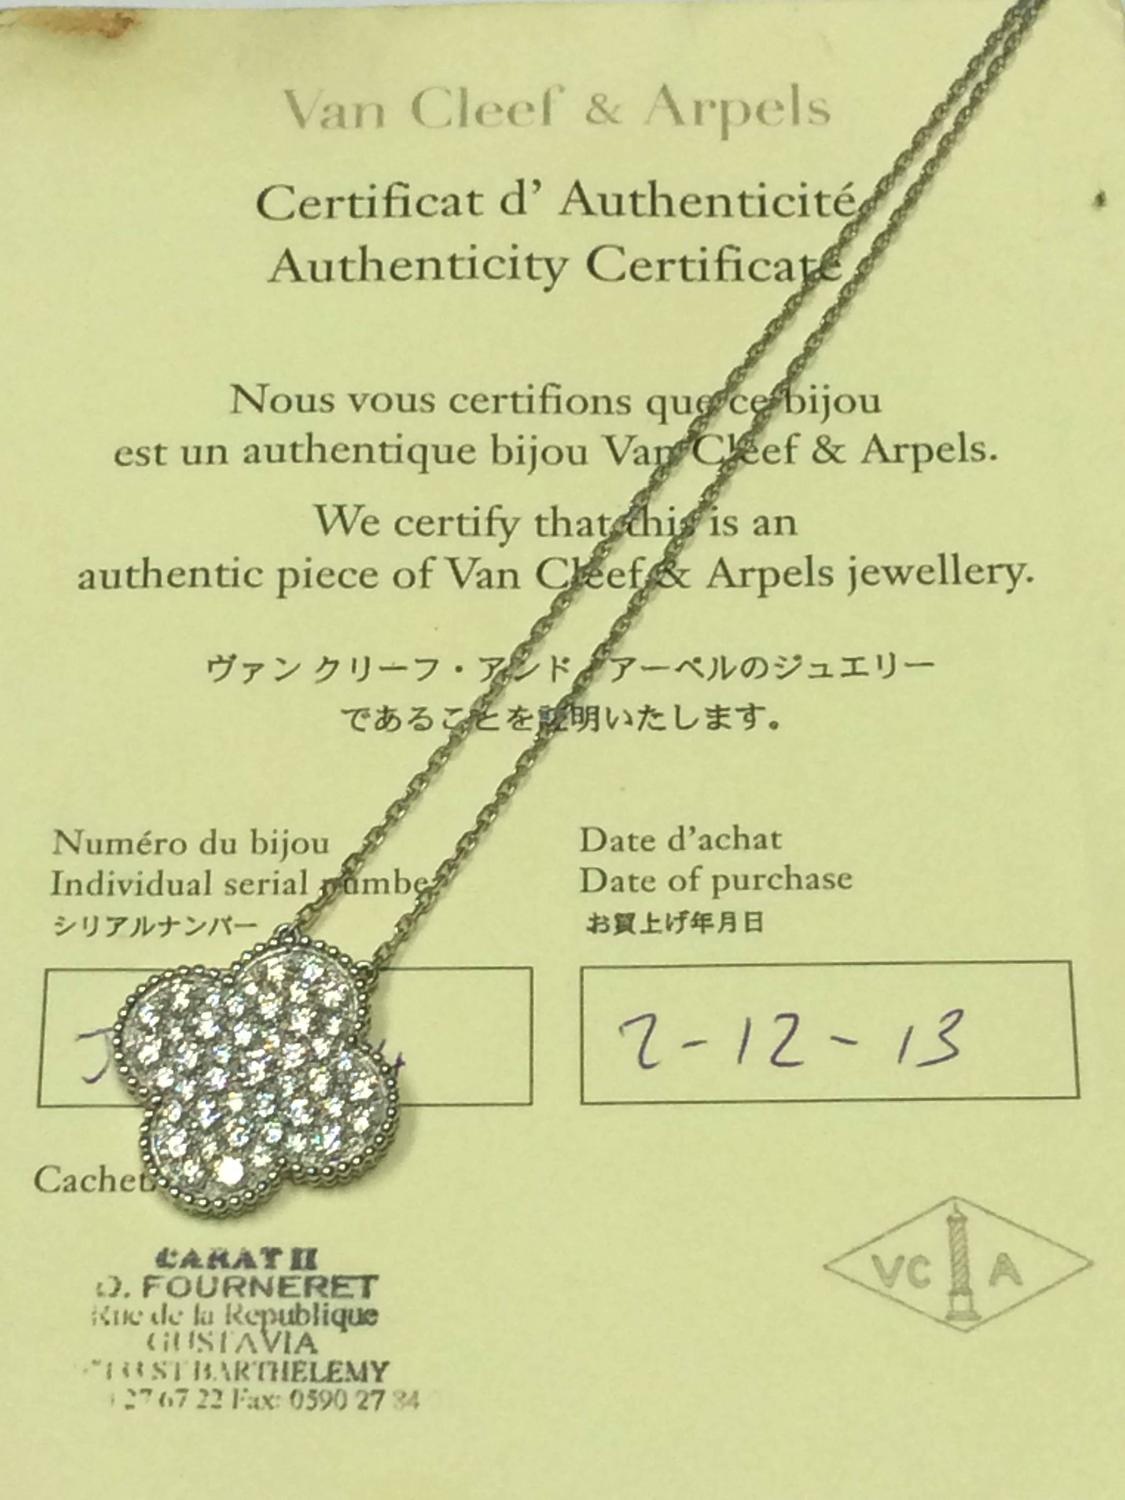 van cleef and arpels certificate of authenticity